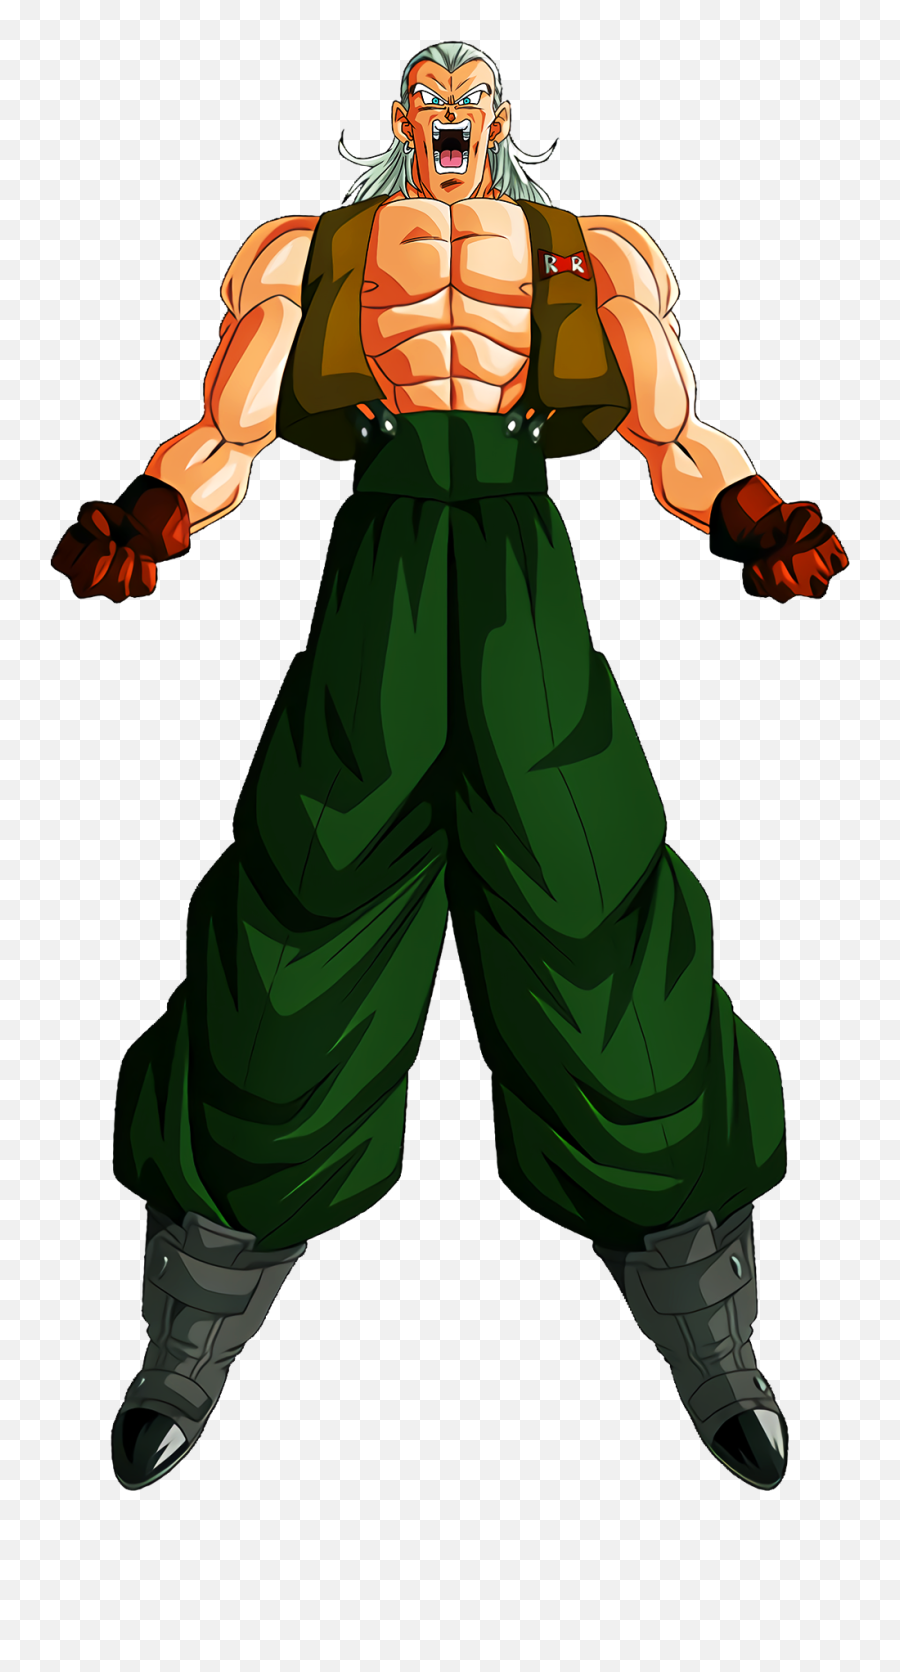 Circuits Of Target Exusion Android 13 Render Dragon Ball Z - Android 13 Render Emoji,Target Emoji Android